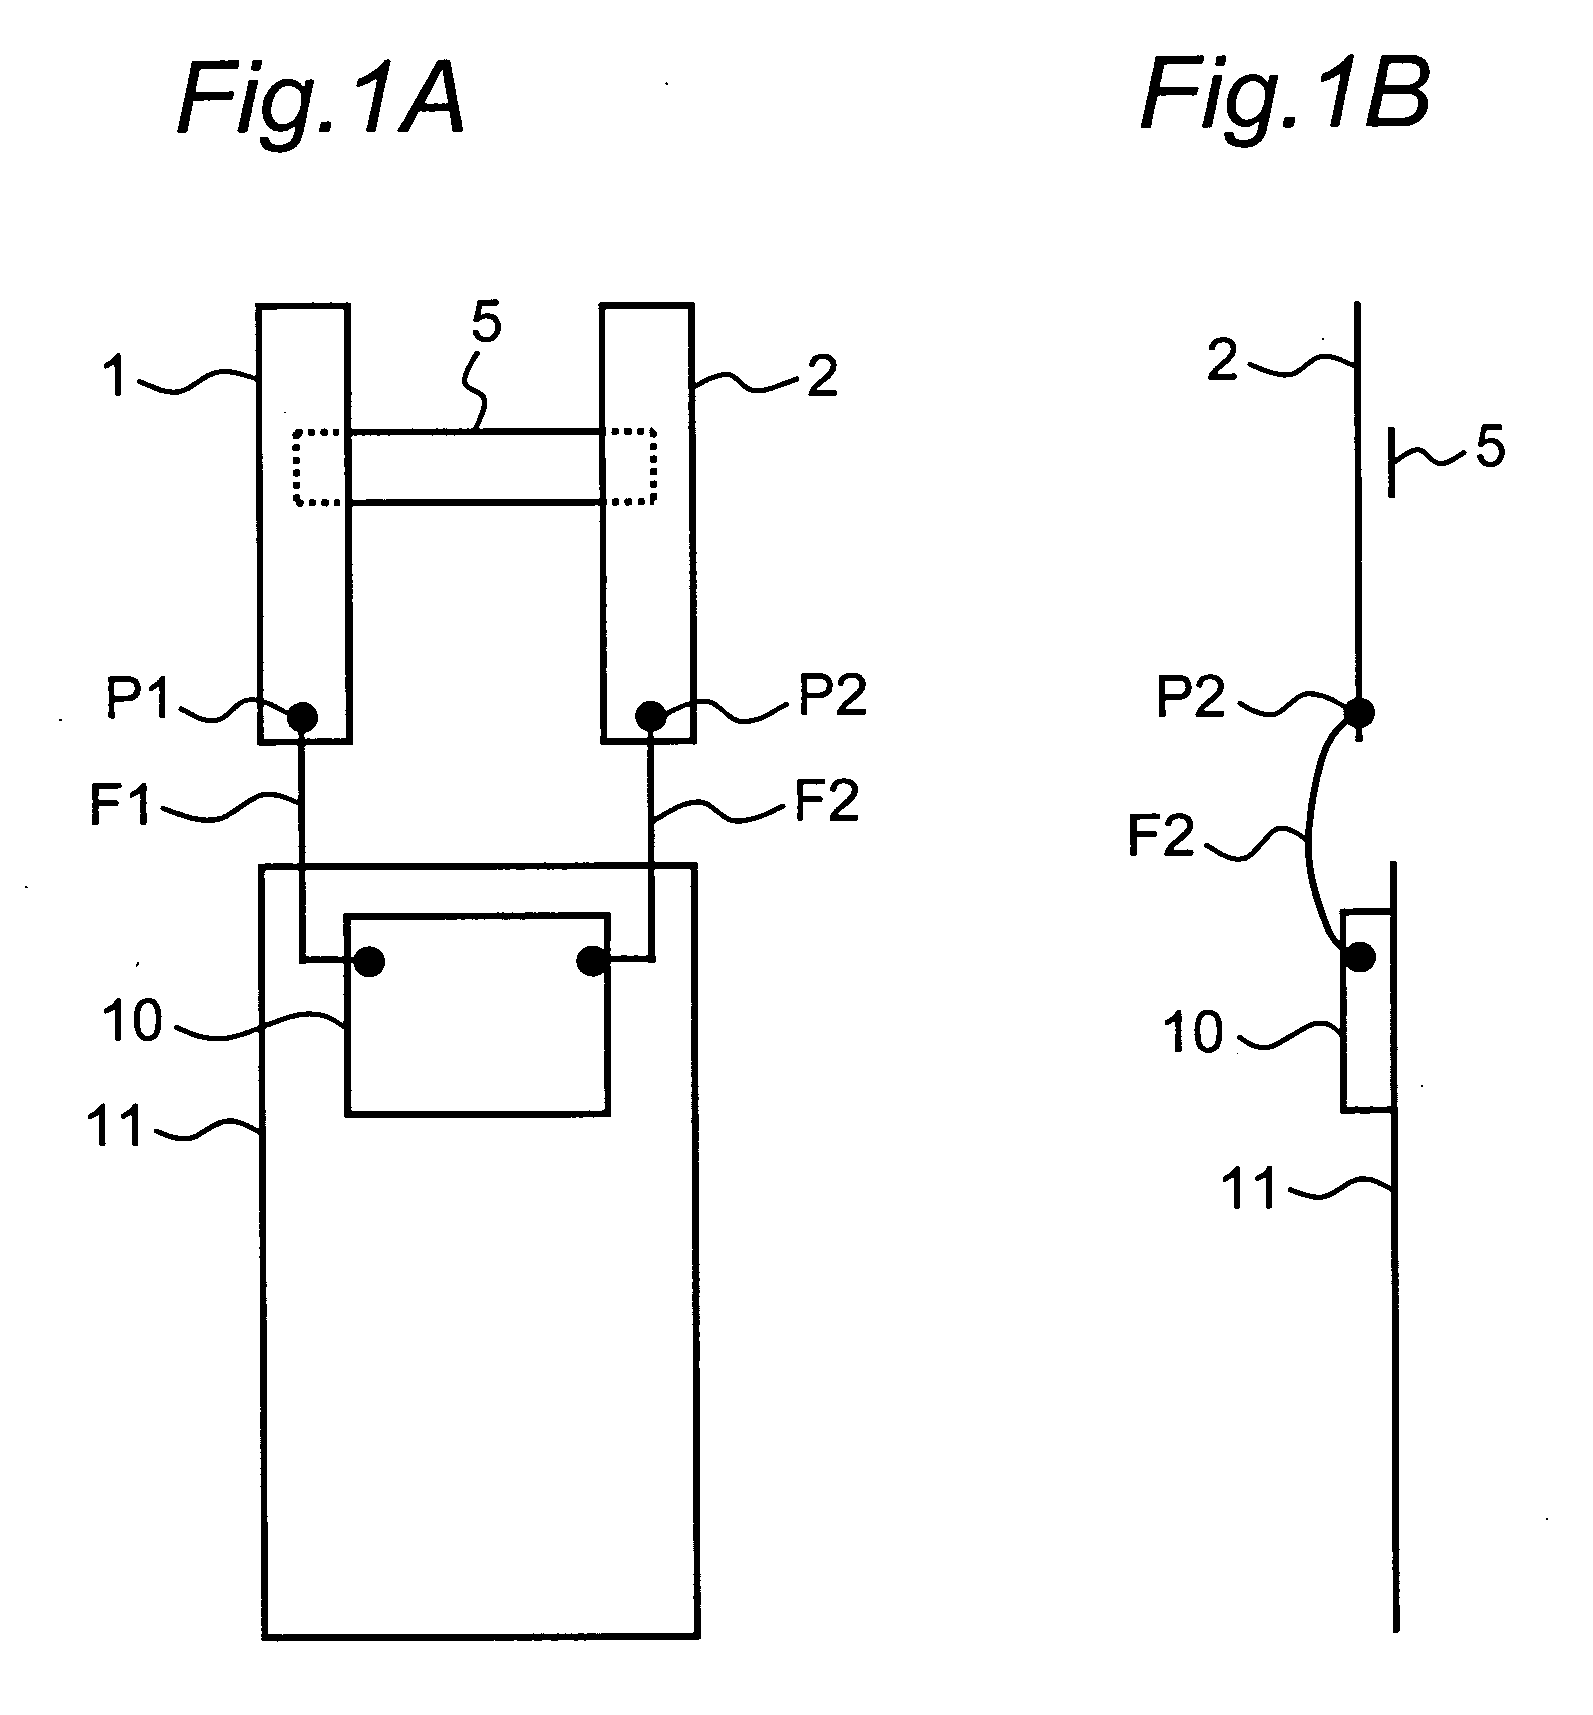 Array antenna apparatus having at least two feeding elements and operable in multiple frequency bands